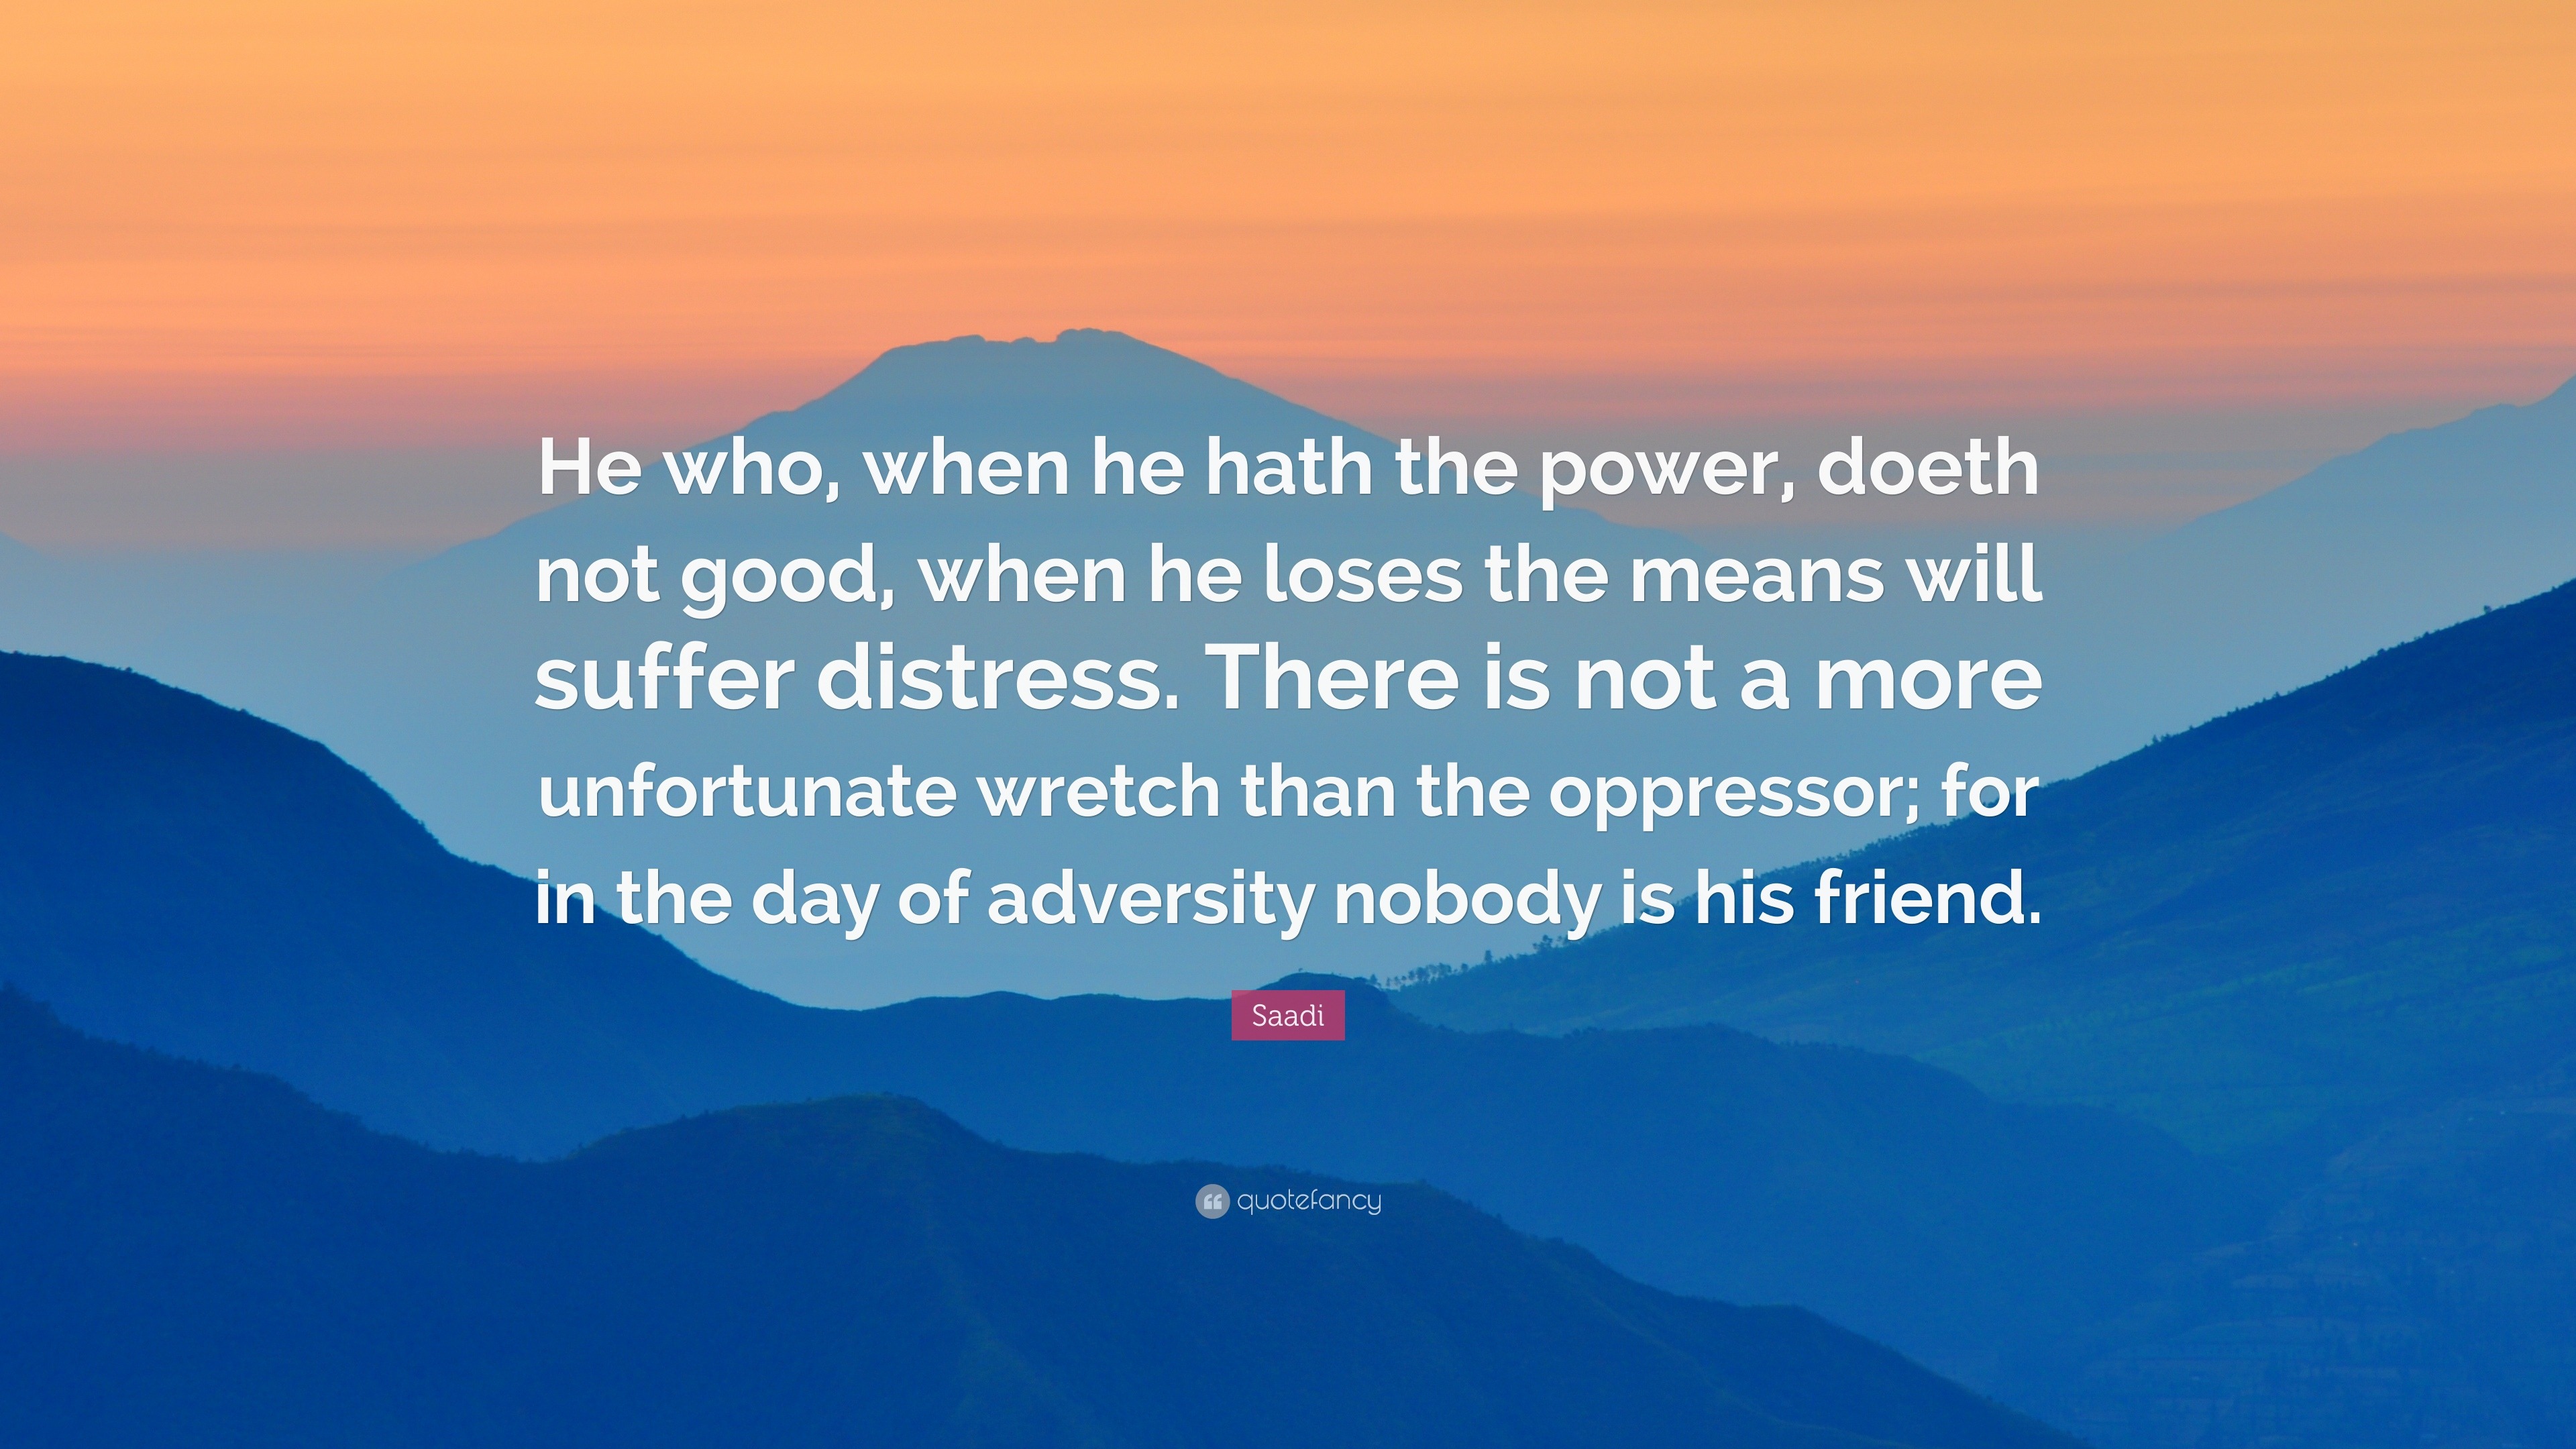 Saadi Quote: “He who, when he hath the power, doeth not good, when he ...